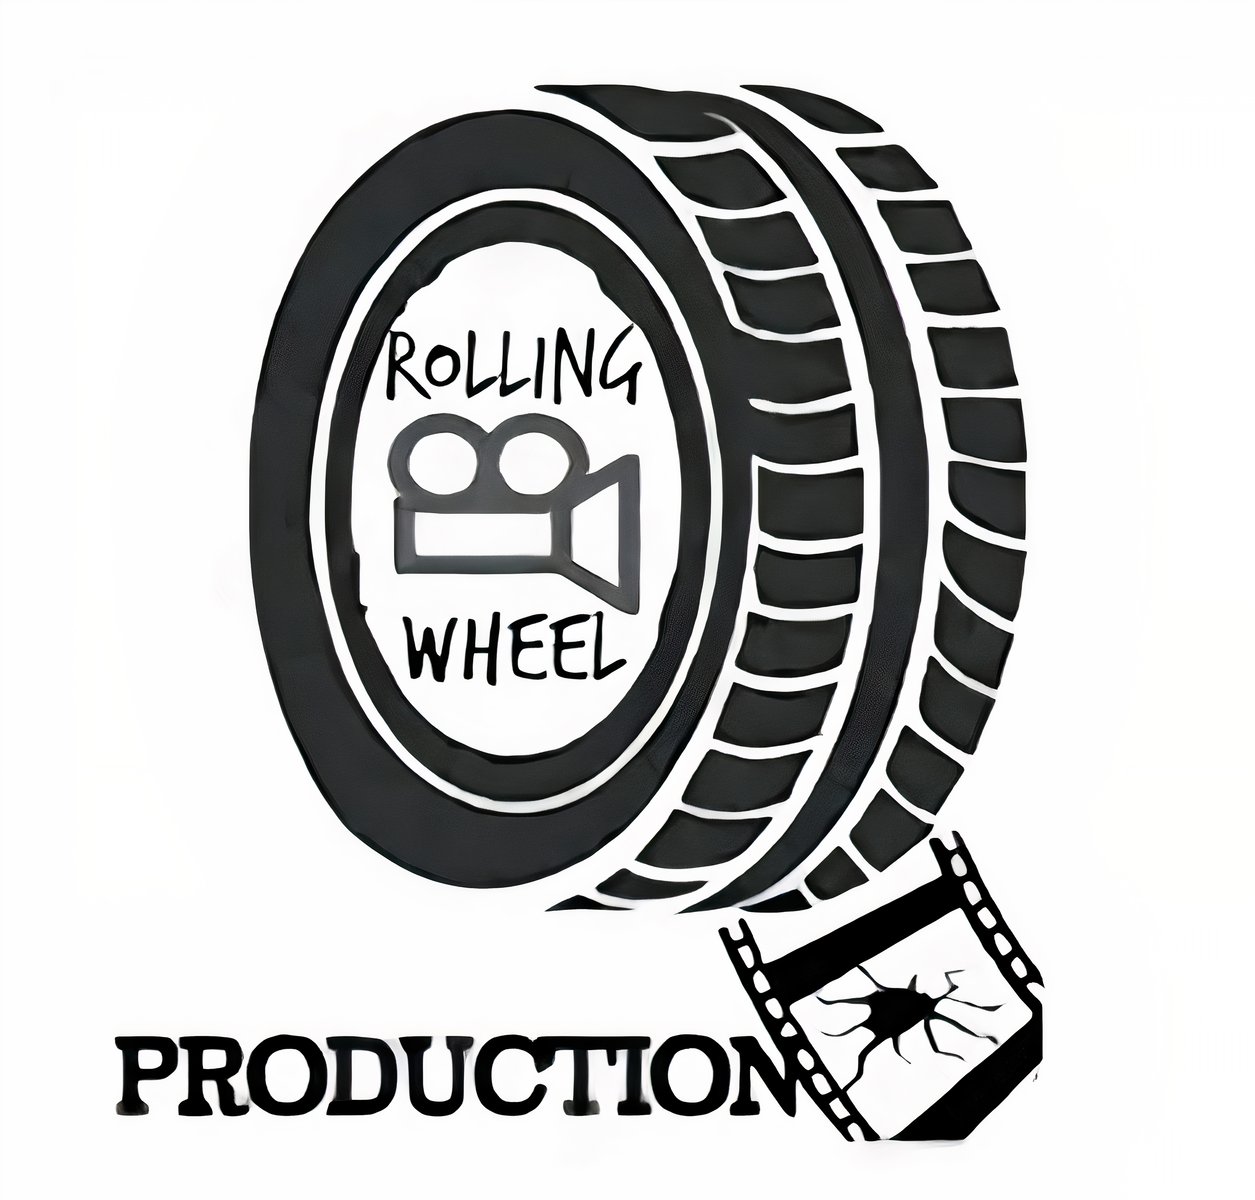 Movie Props Rolling Wheel Production